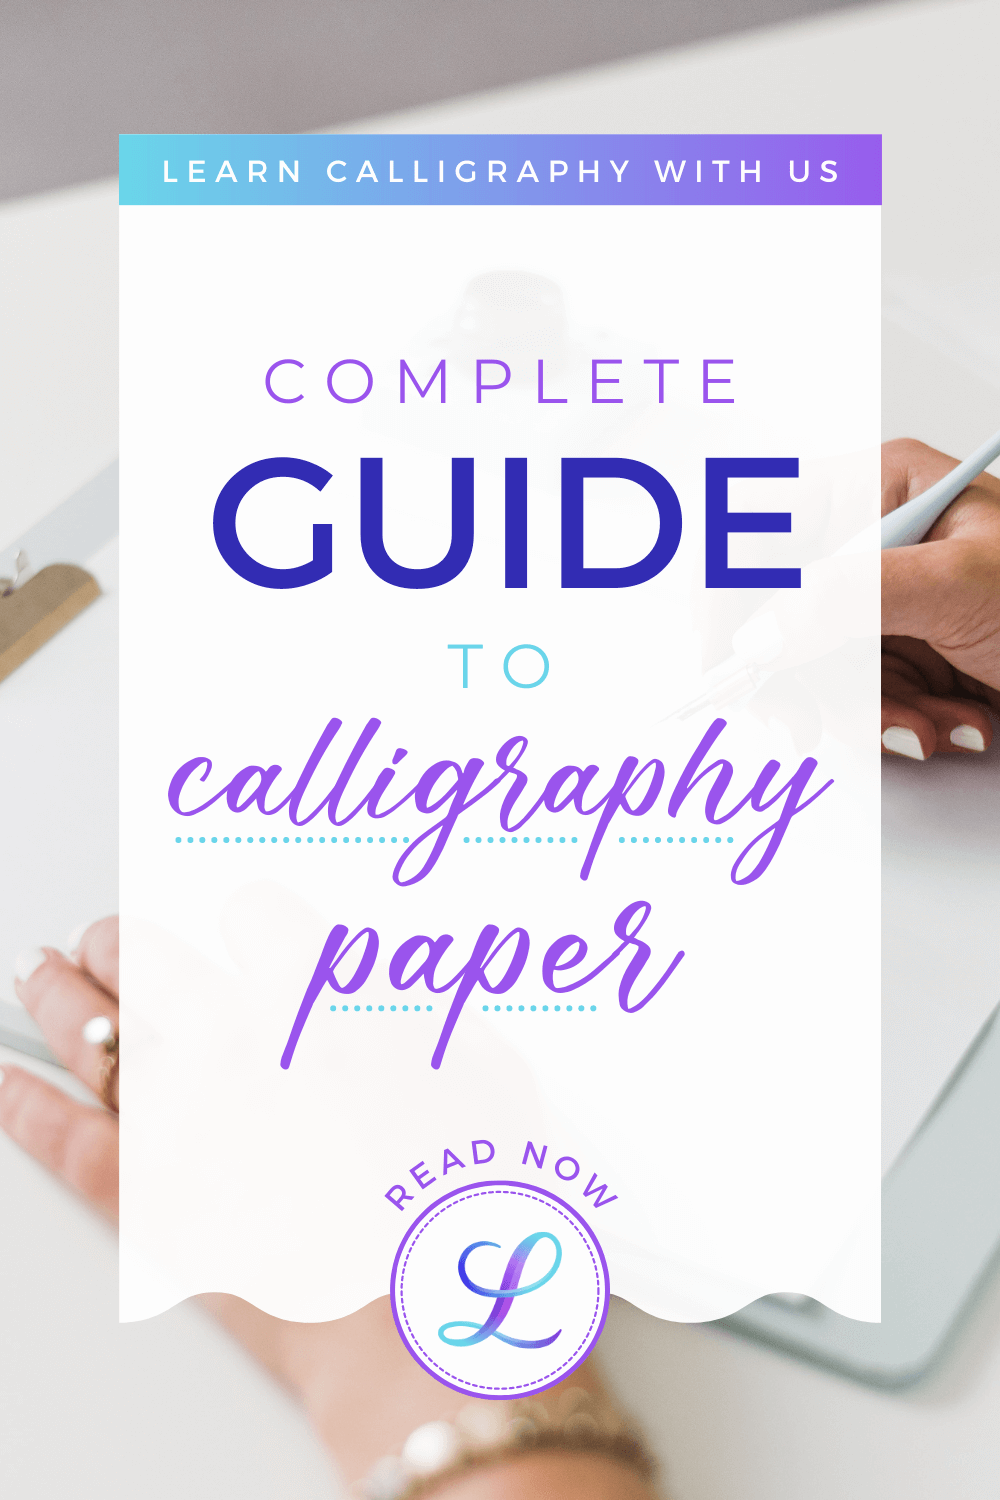 4 Tips On How To Start Learning Calligraphy – The Papery